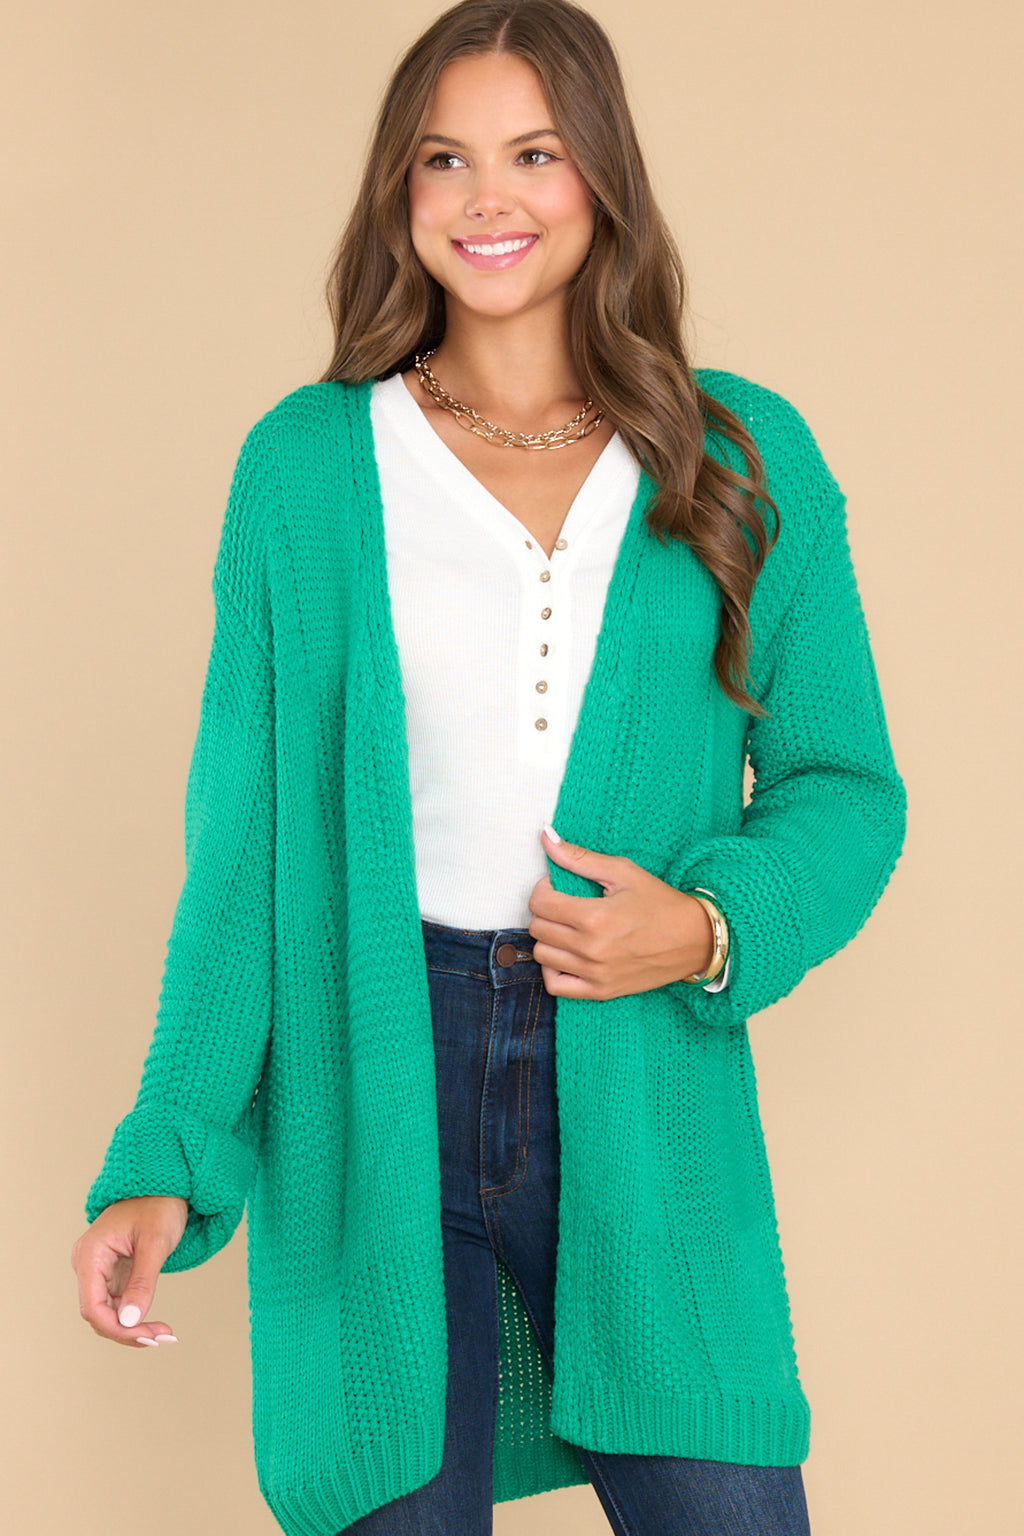 Adorable Kelly Green Cardigan - All Tops | Red Dress